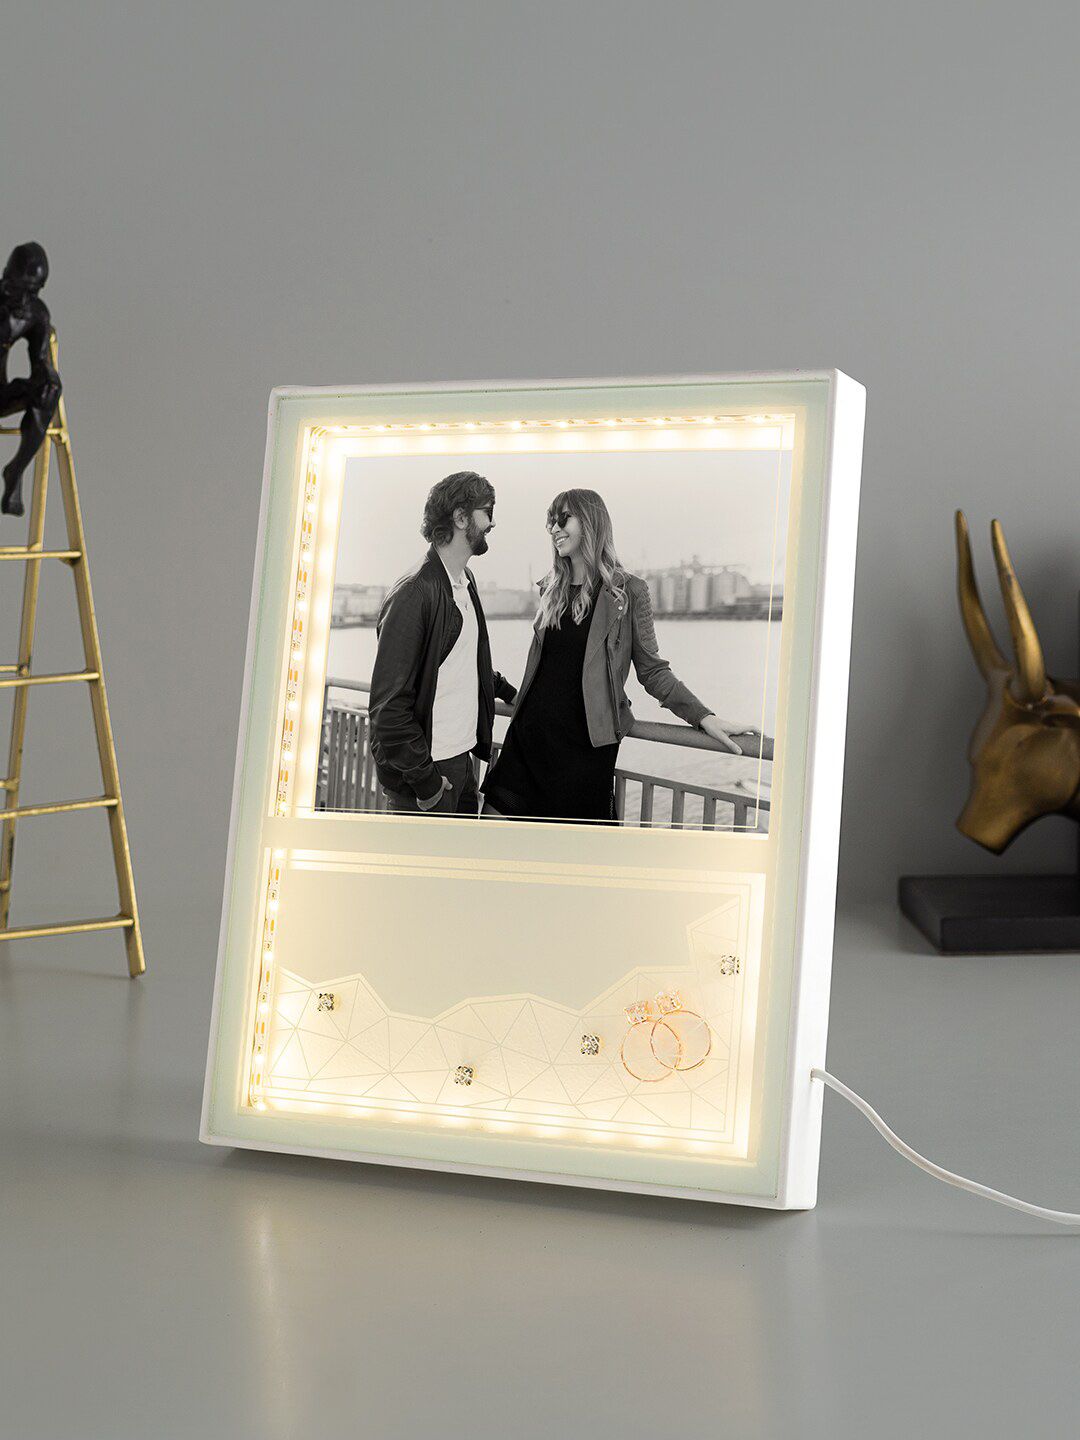 Golden Peacock White Solid Rectangular LED Table-Top Photo Frame Price in India